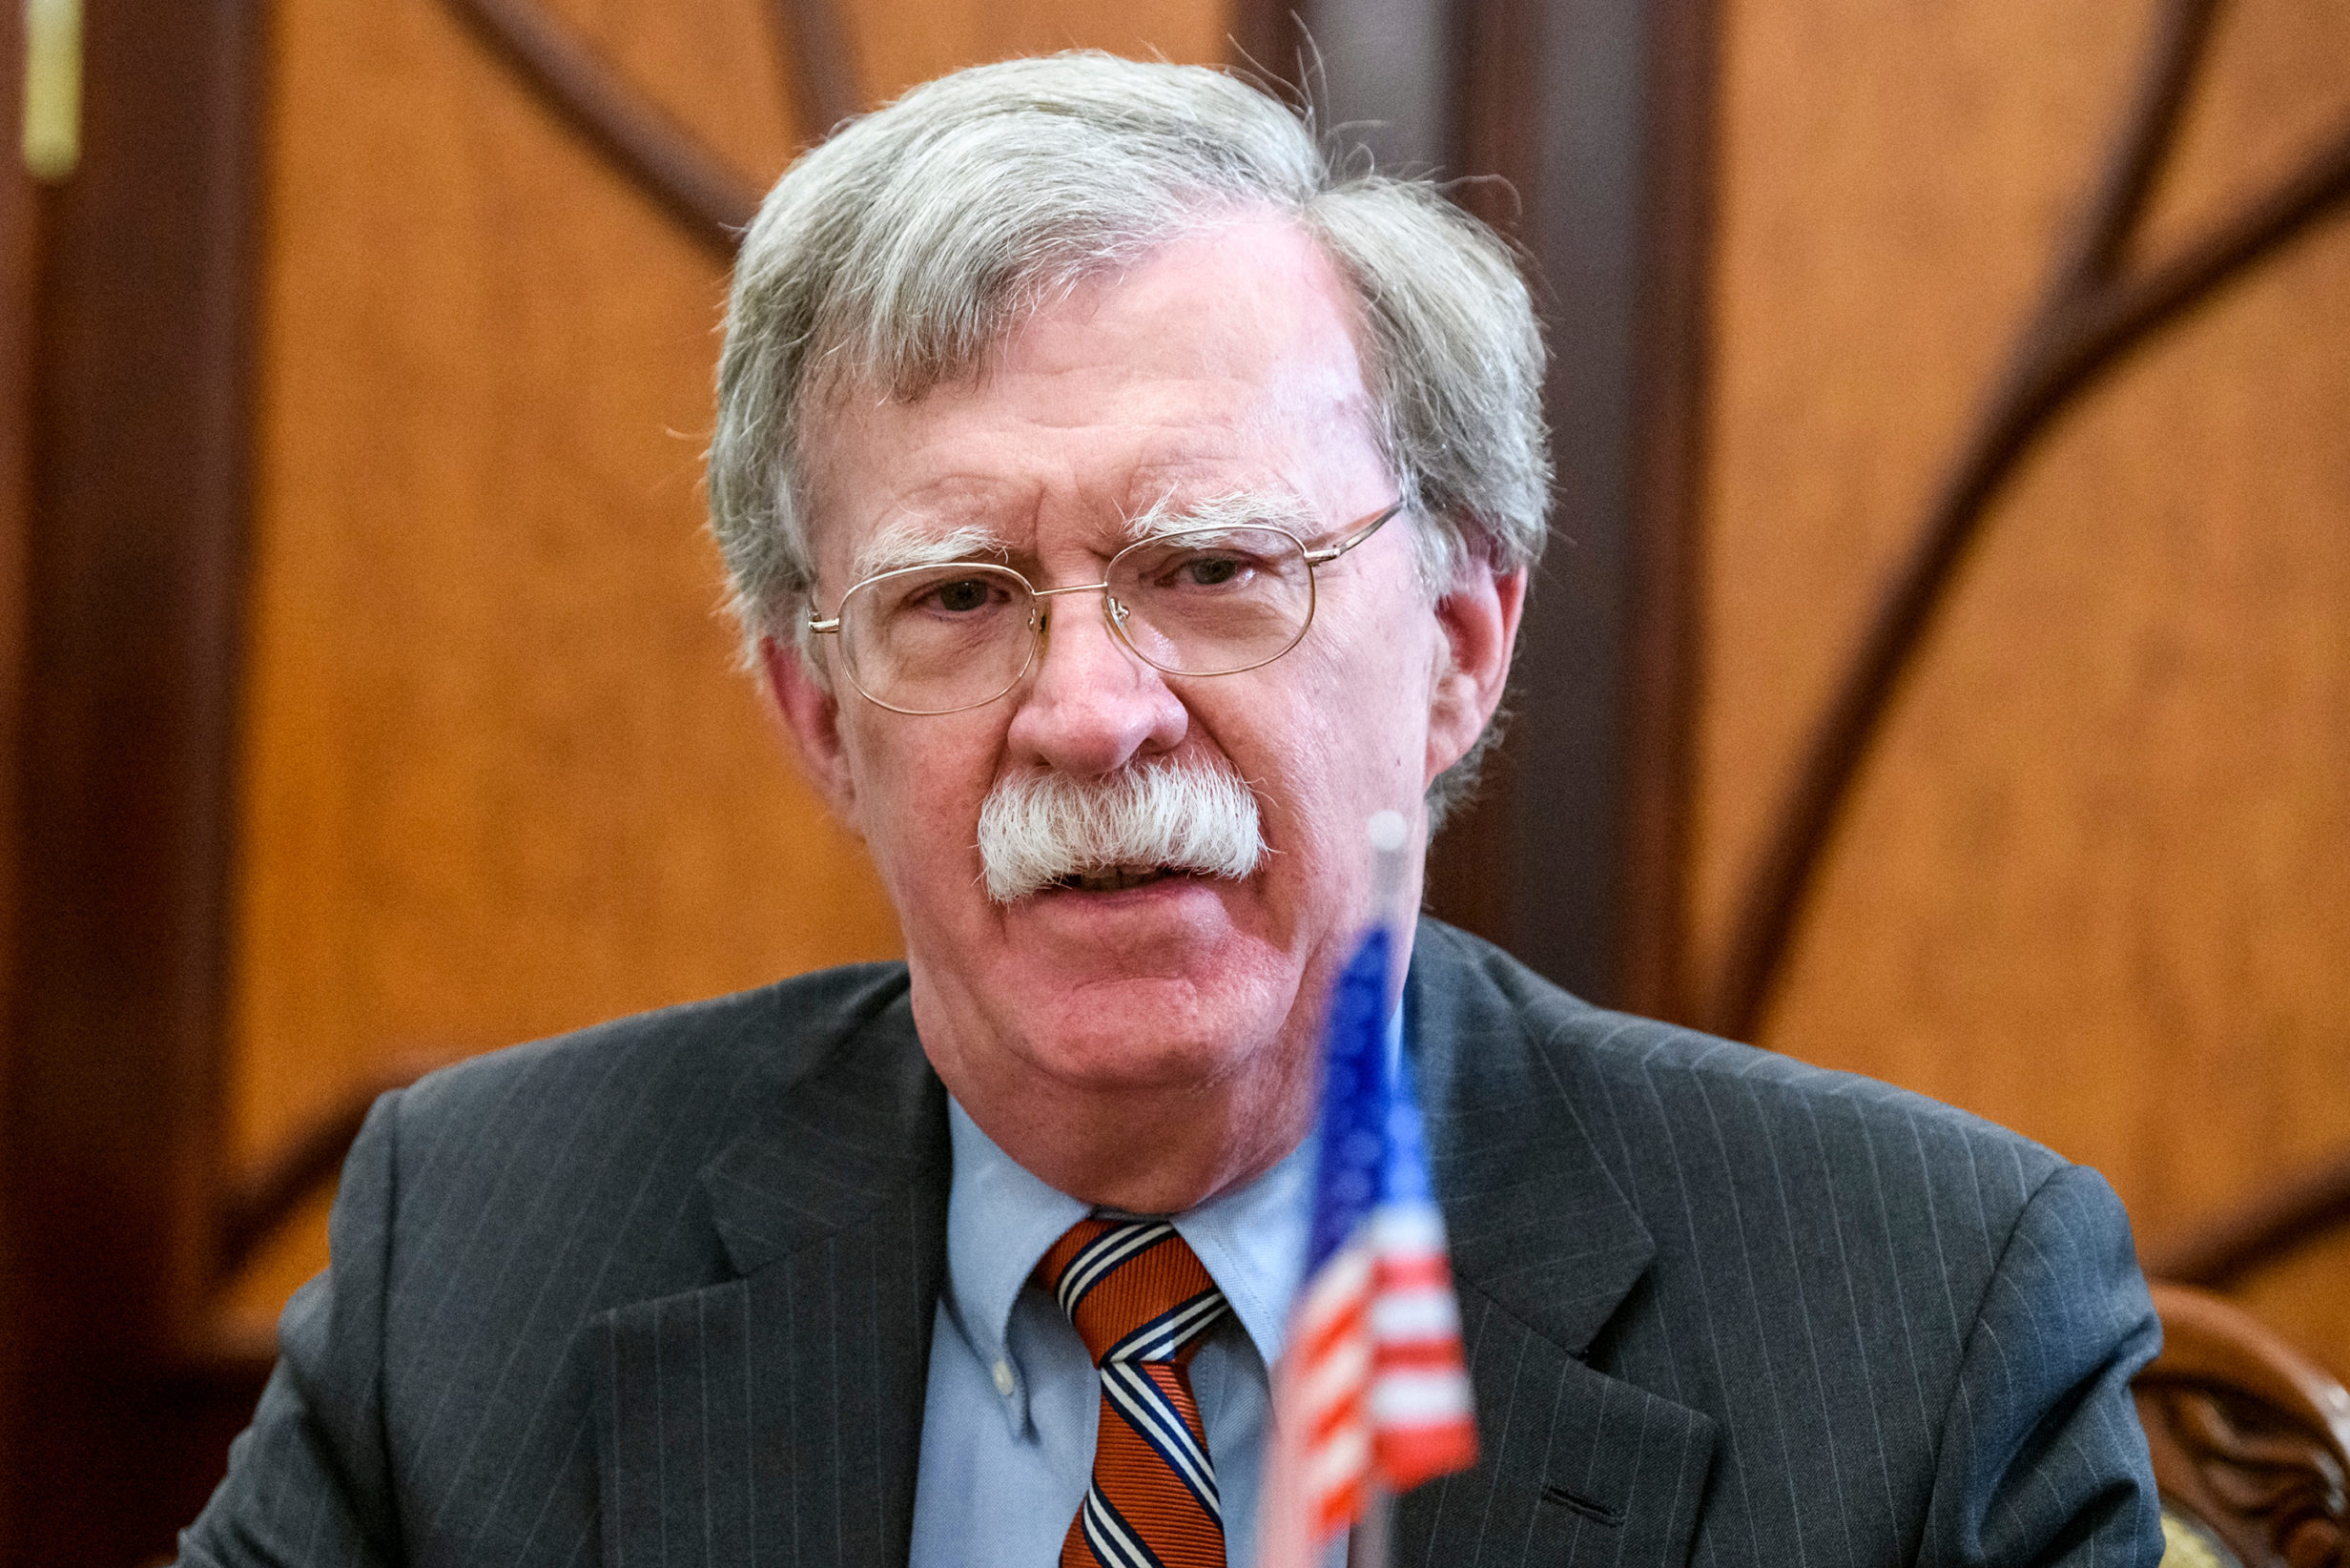 John,Bolton,National,Security,Advisor,To,The,United,States,During